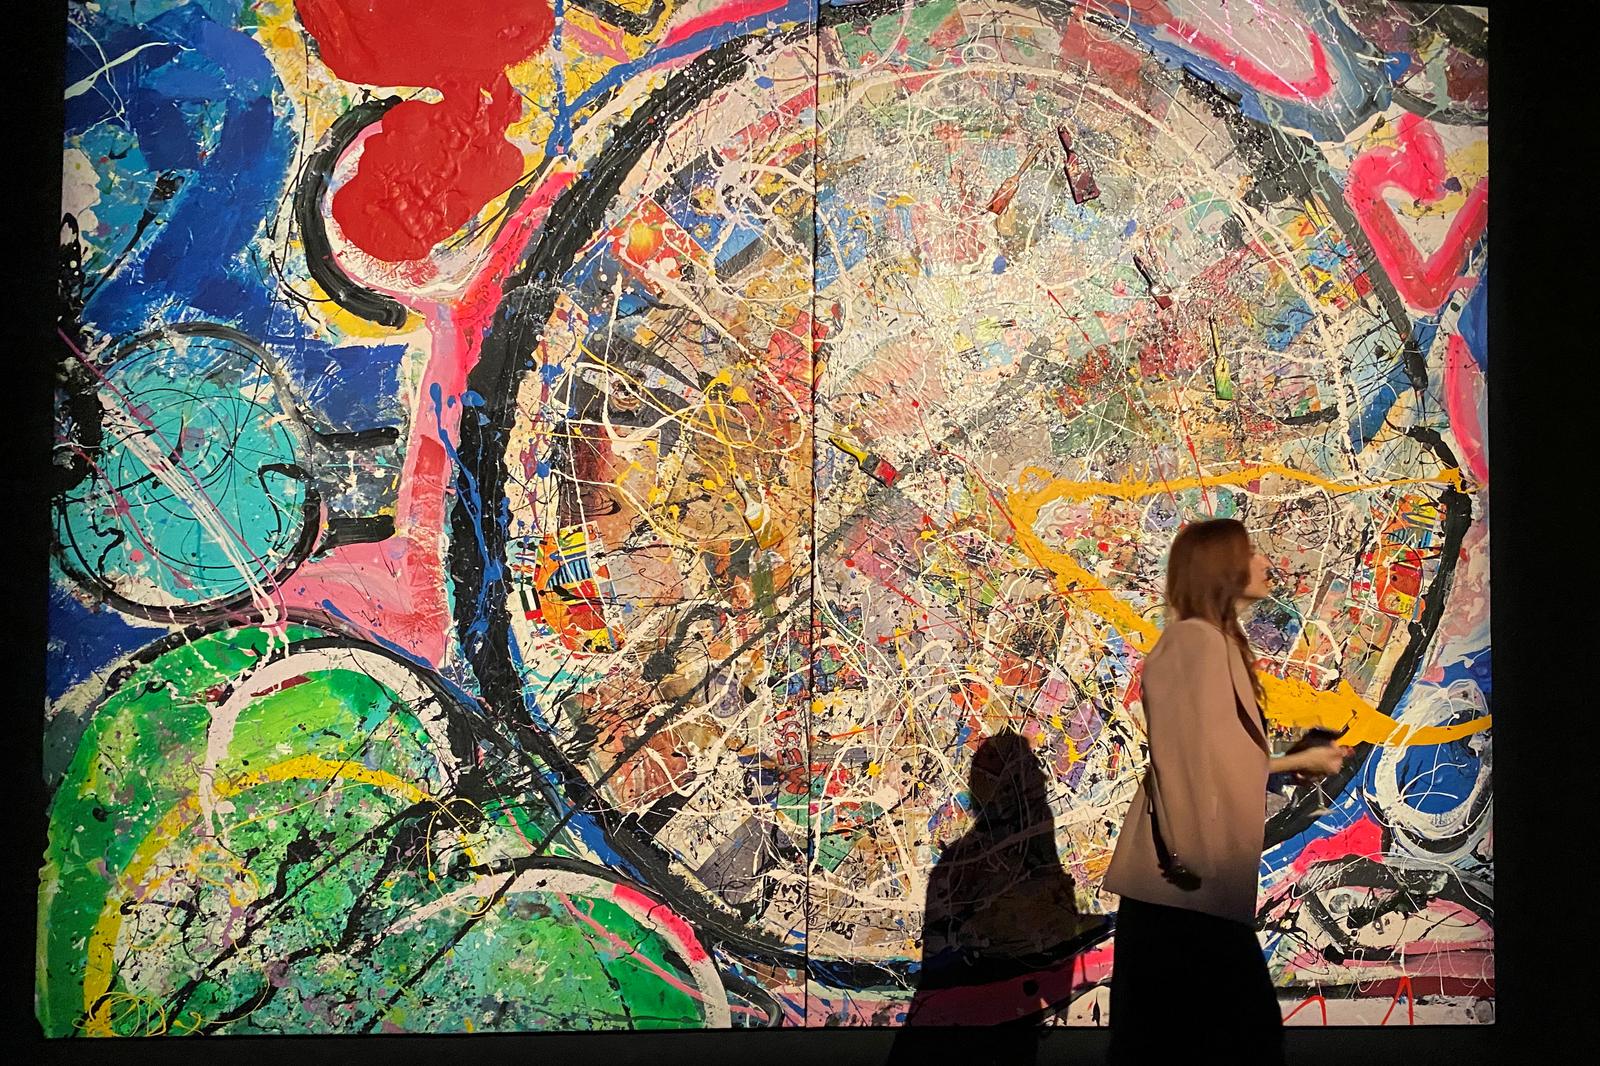 Artwork from world's largest canvas painting sells for $62 million in Dubai